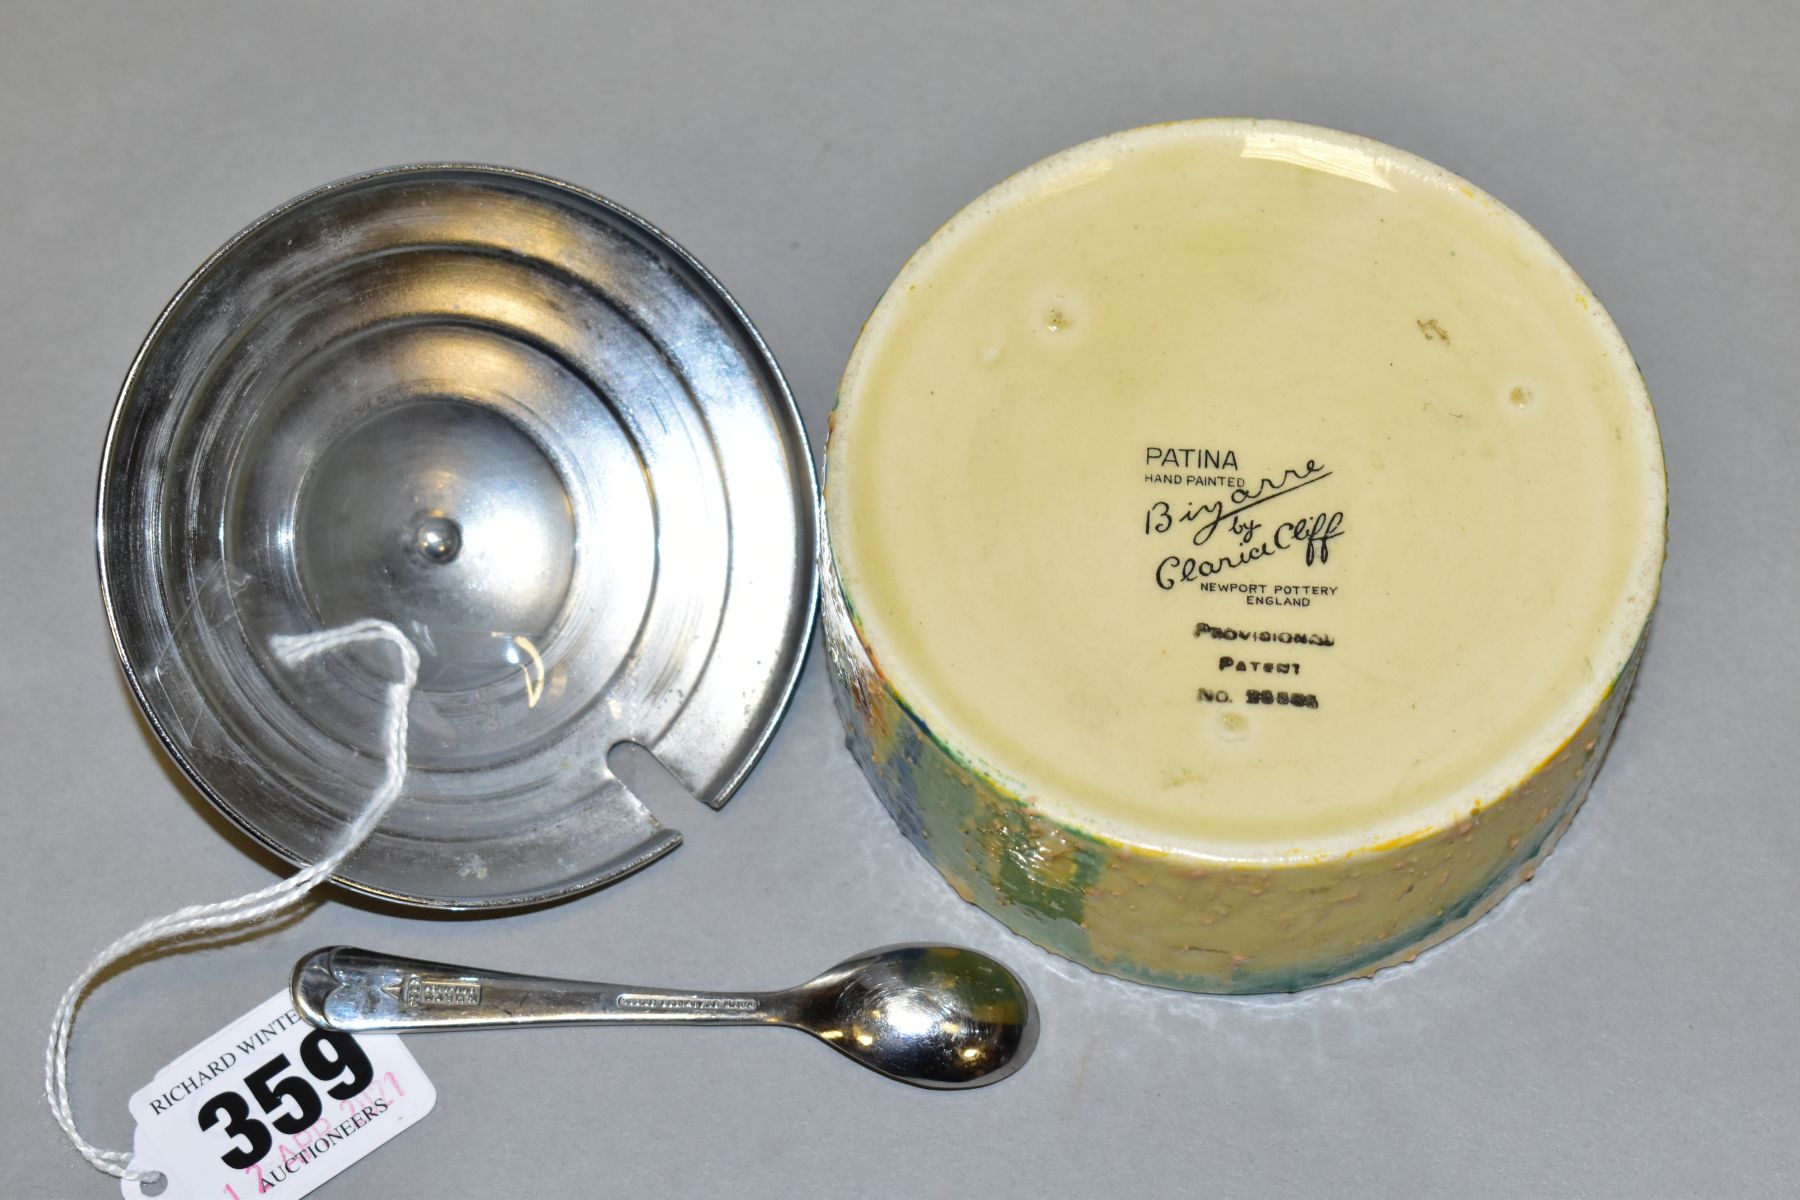 A CLARICE CLIFF BIZARRE PATINA CIRCULAR PRESERVE JAR WITH REPLACEMENT CHROME COVER AND A SPOON, - Image 5 of 5